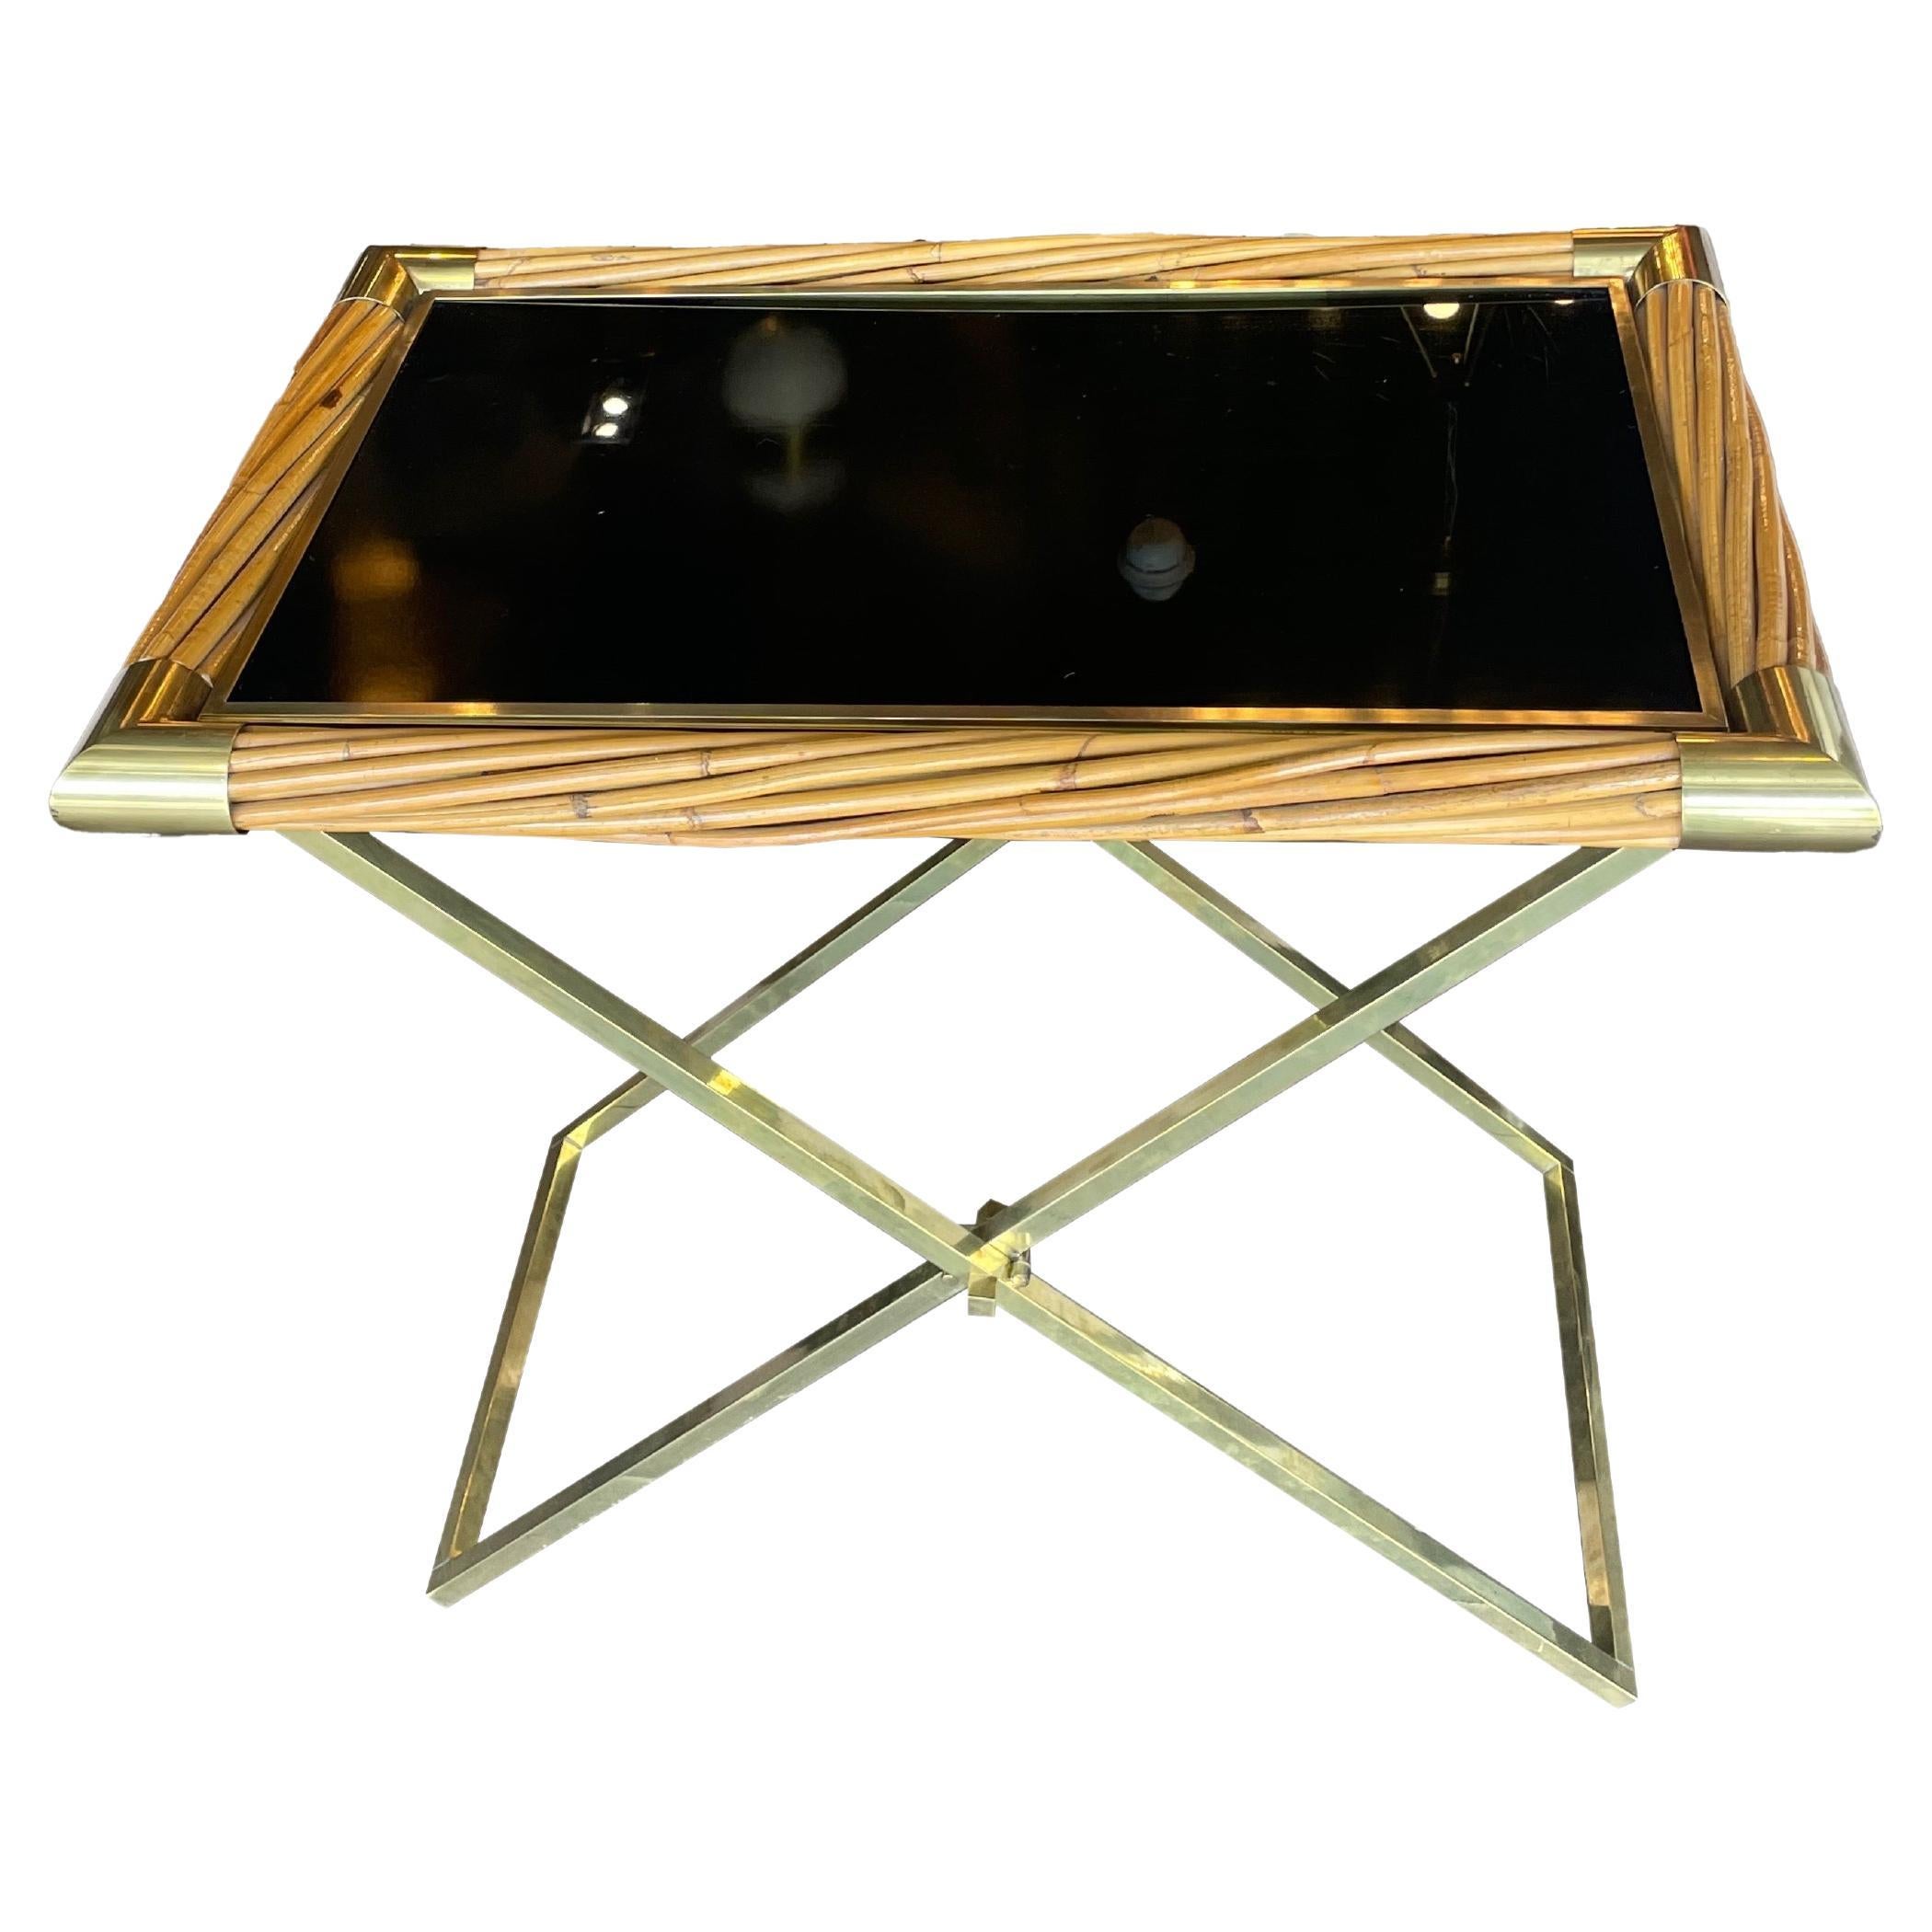 Sourced by Martyn Lawrence Bullard in Paris, France
Rattan frame, topped with blackened glass and brass hardware
Removable glass top, and original accents 
